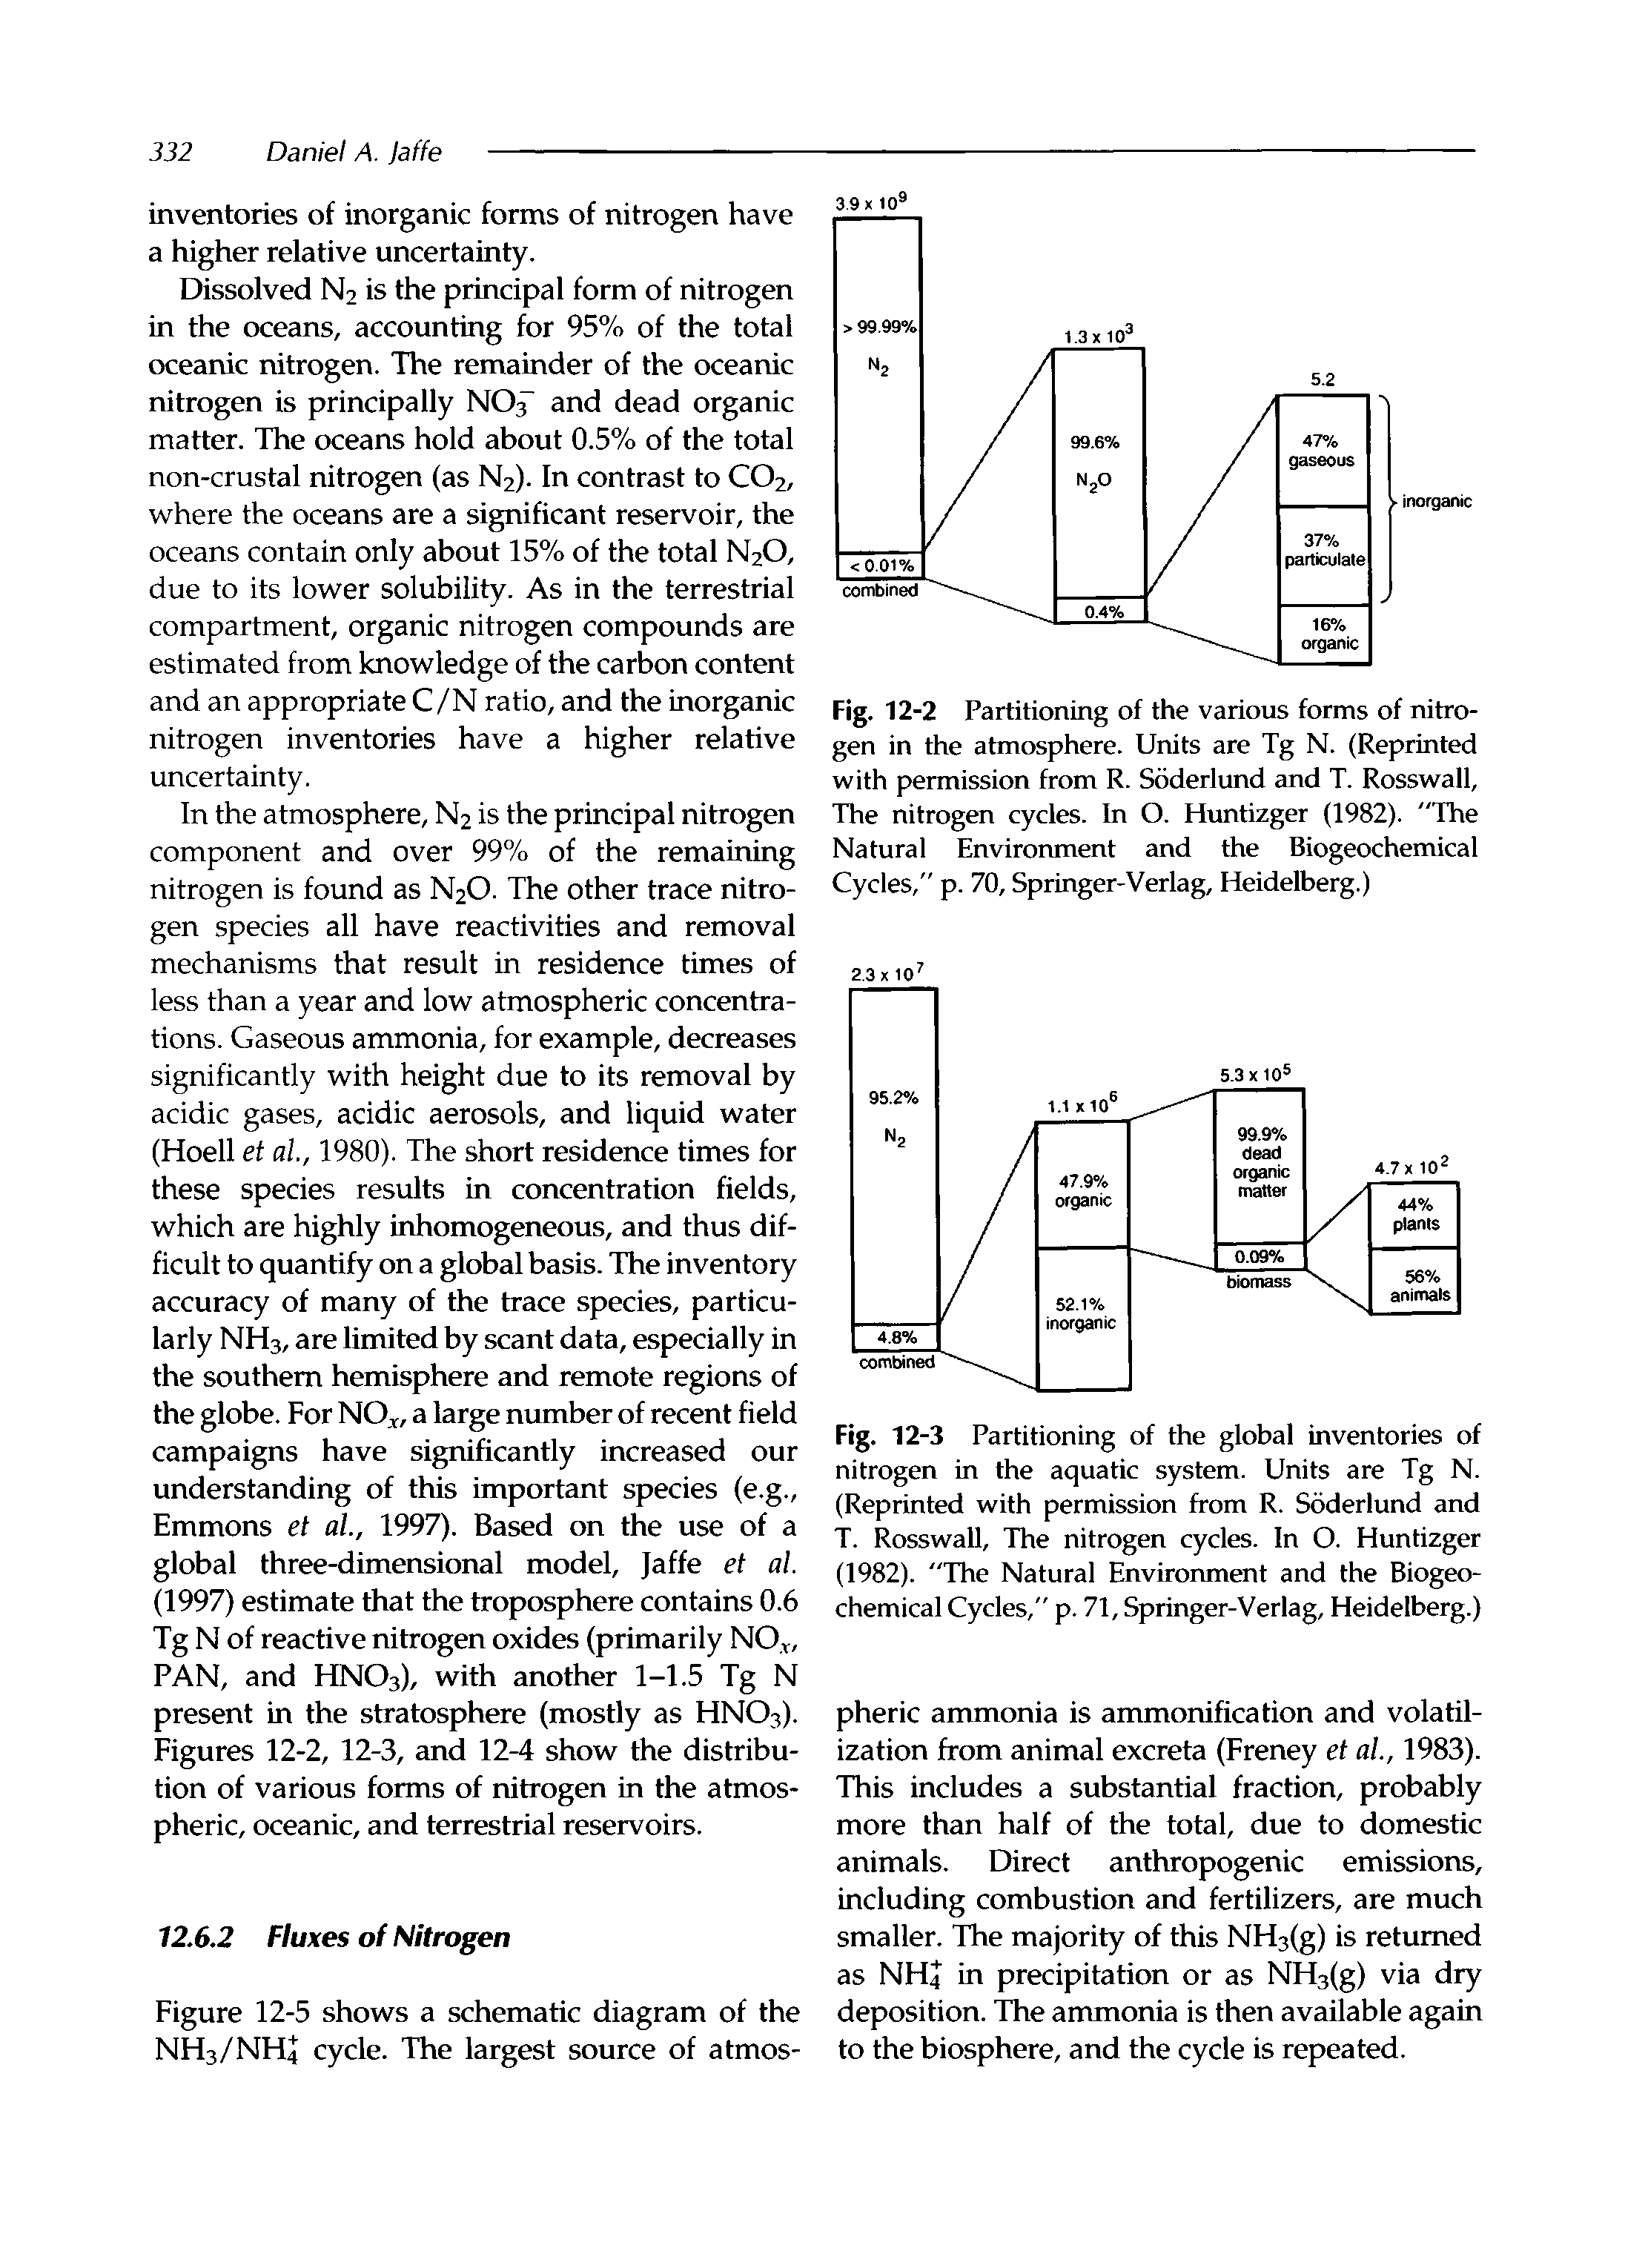 Fig. 12-3 Partitioning of the global inventories of nitrogen in the aquatic system. Units are Tg N. (Reprinted with permission from R. Soderlund and T. Rosswall, The nitrogen cycles. In O. Huntizger (1982). "The Natural Environment and the Biogeochemical Cycles," p. 71, Springer-Verlag, Heidelberg.)...